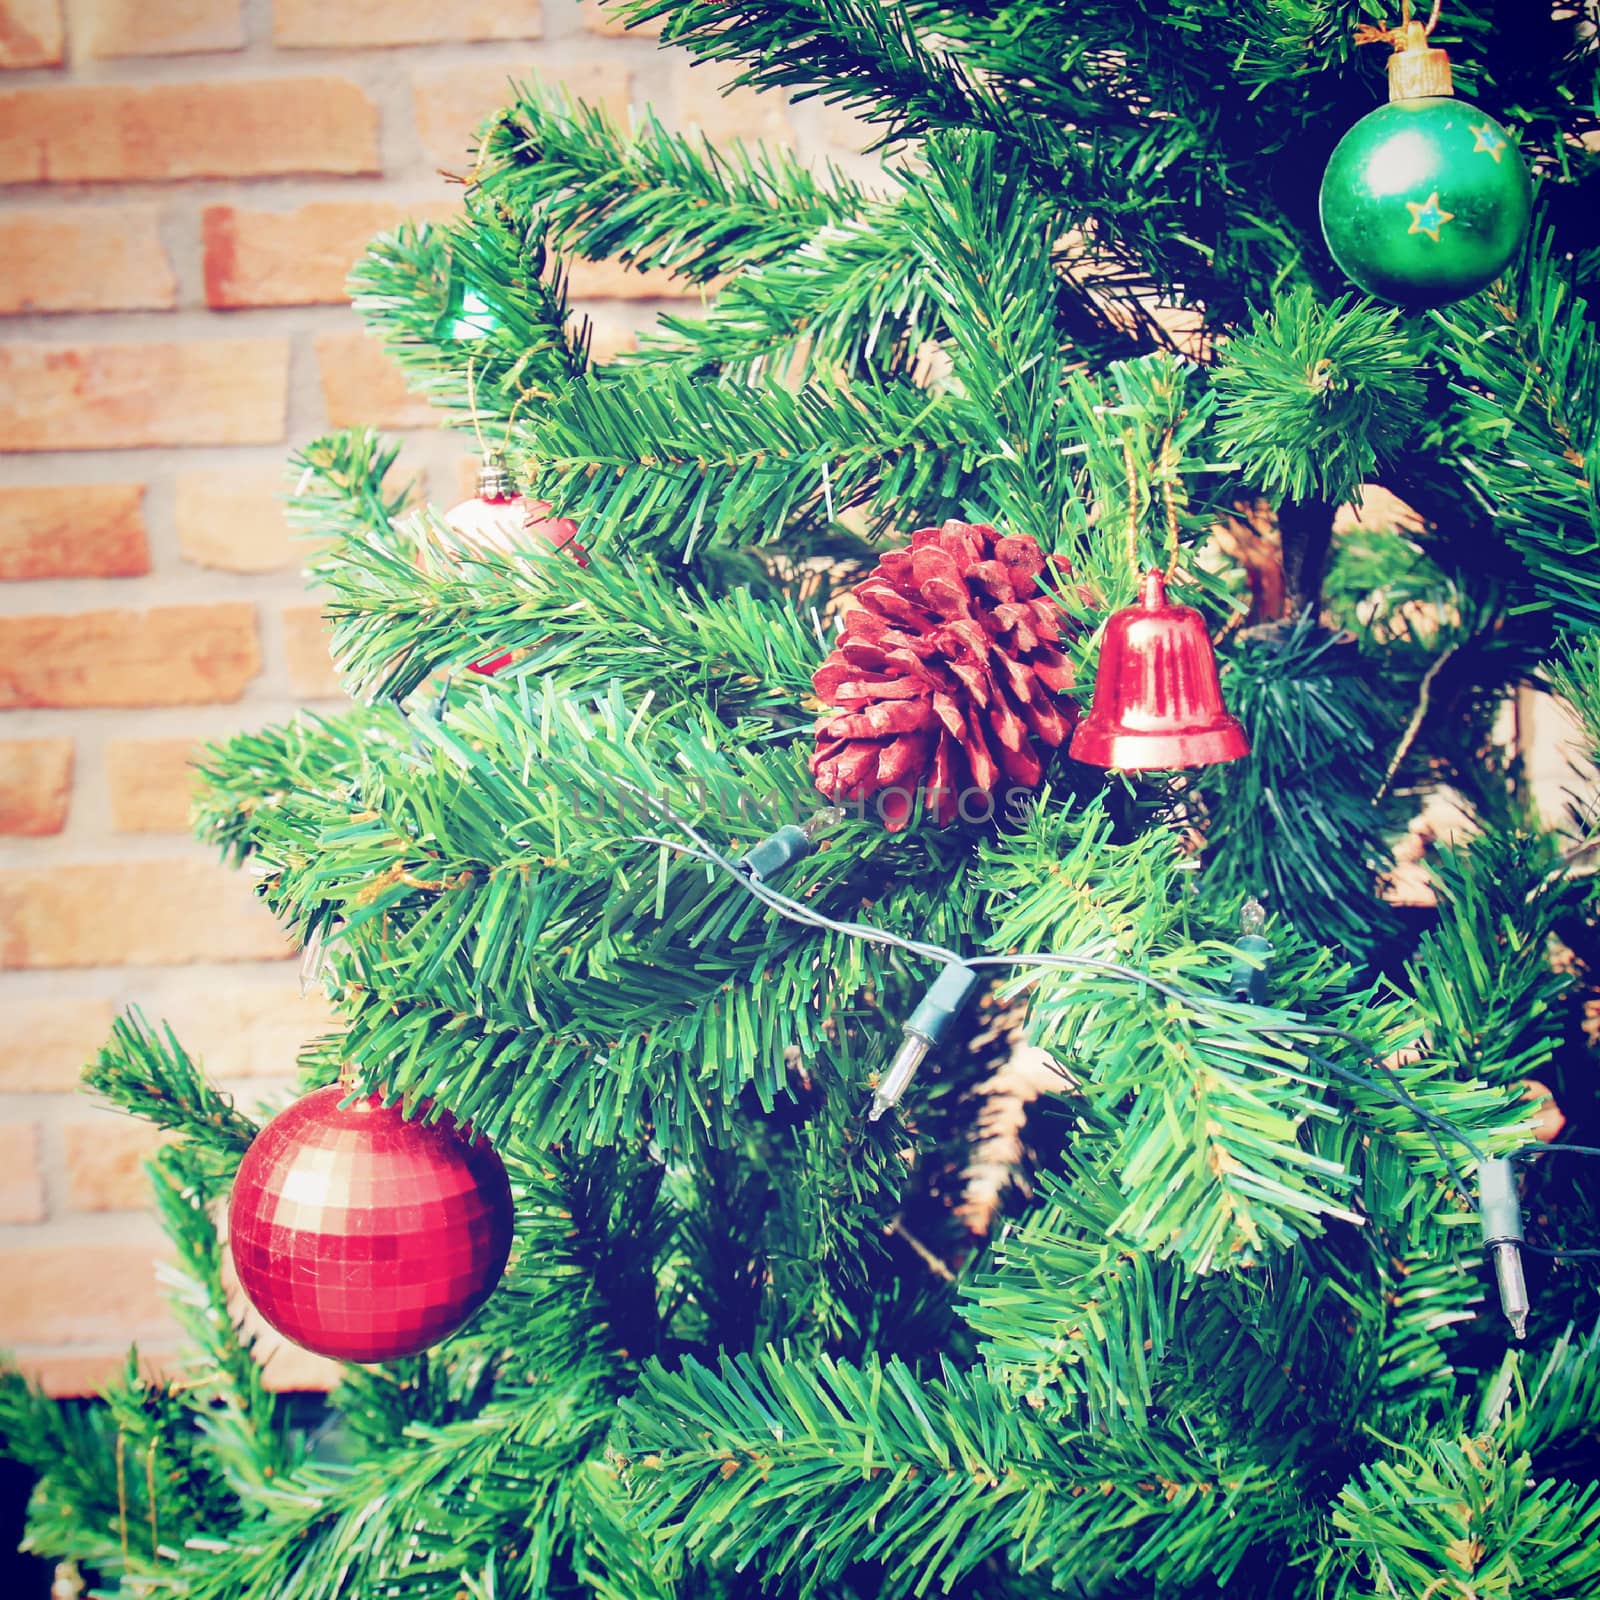 Christmas tree with brick wall, retro filter effect by nuchylee